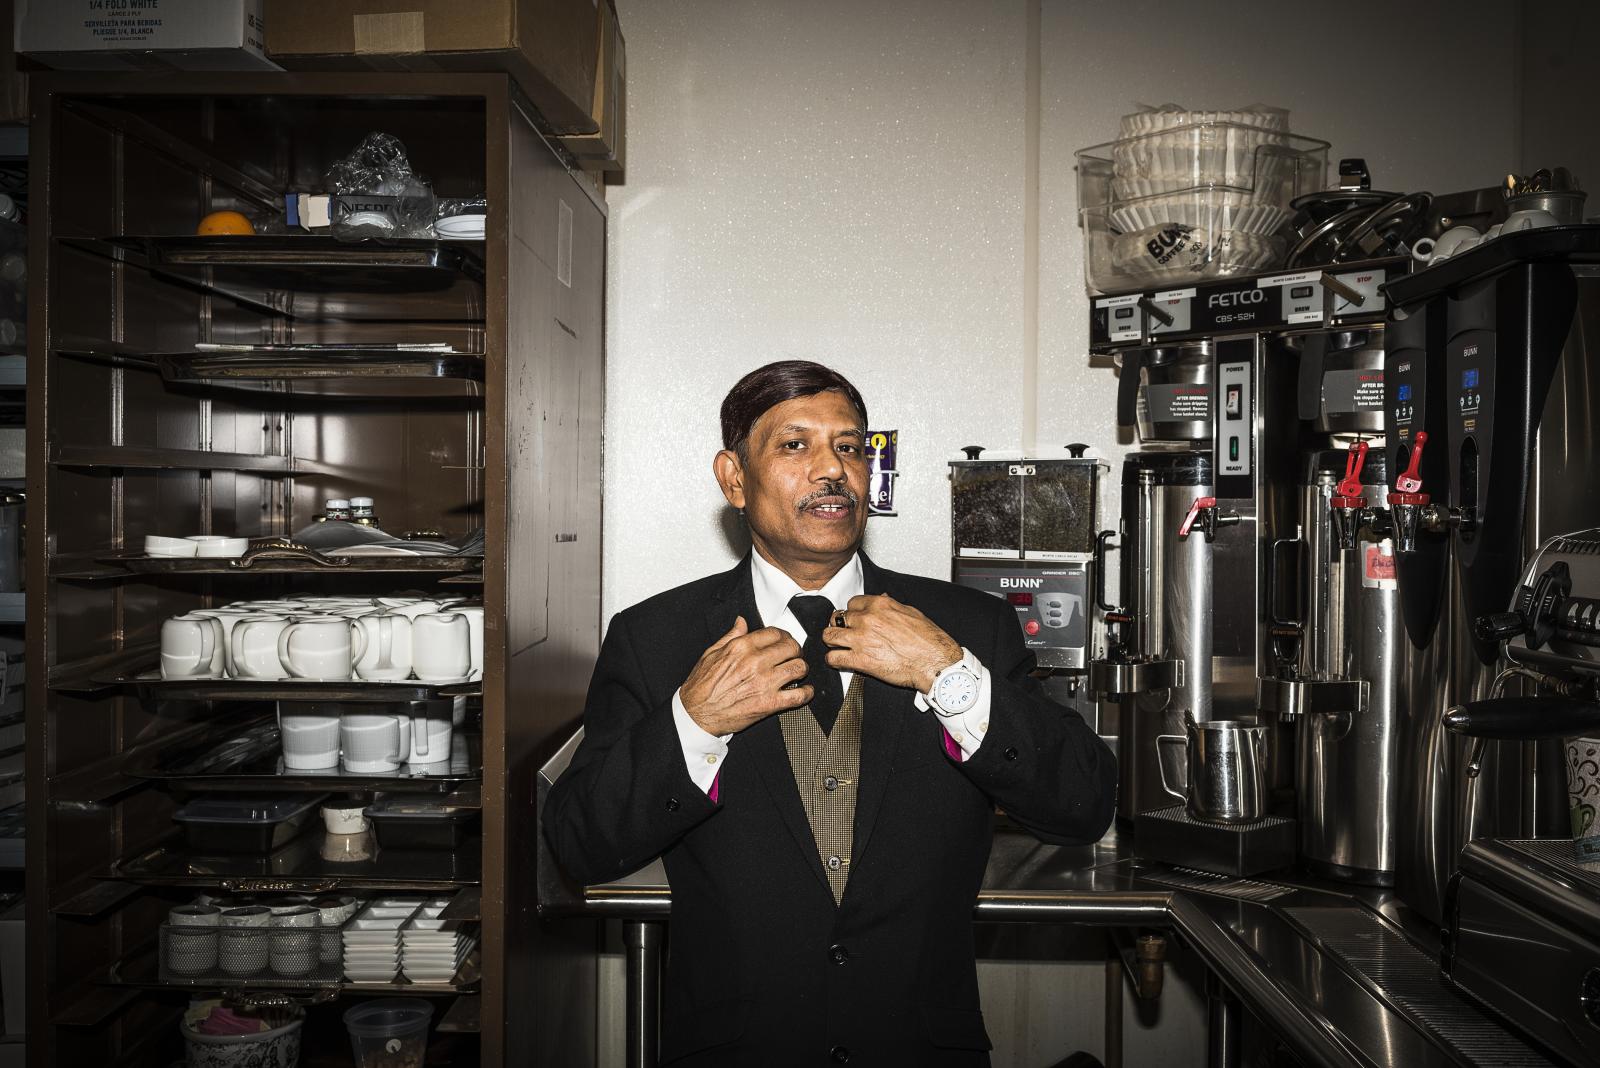 Image from Portraits - Latif Ali has been working at the Plaza in Room Service...